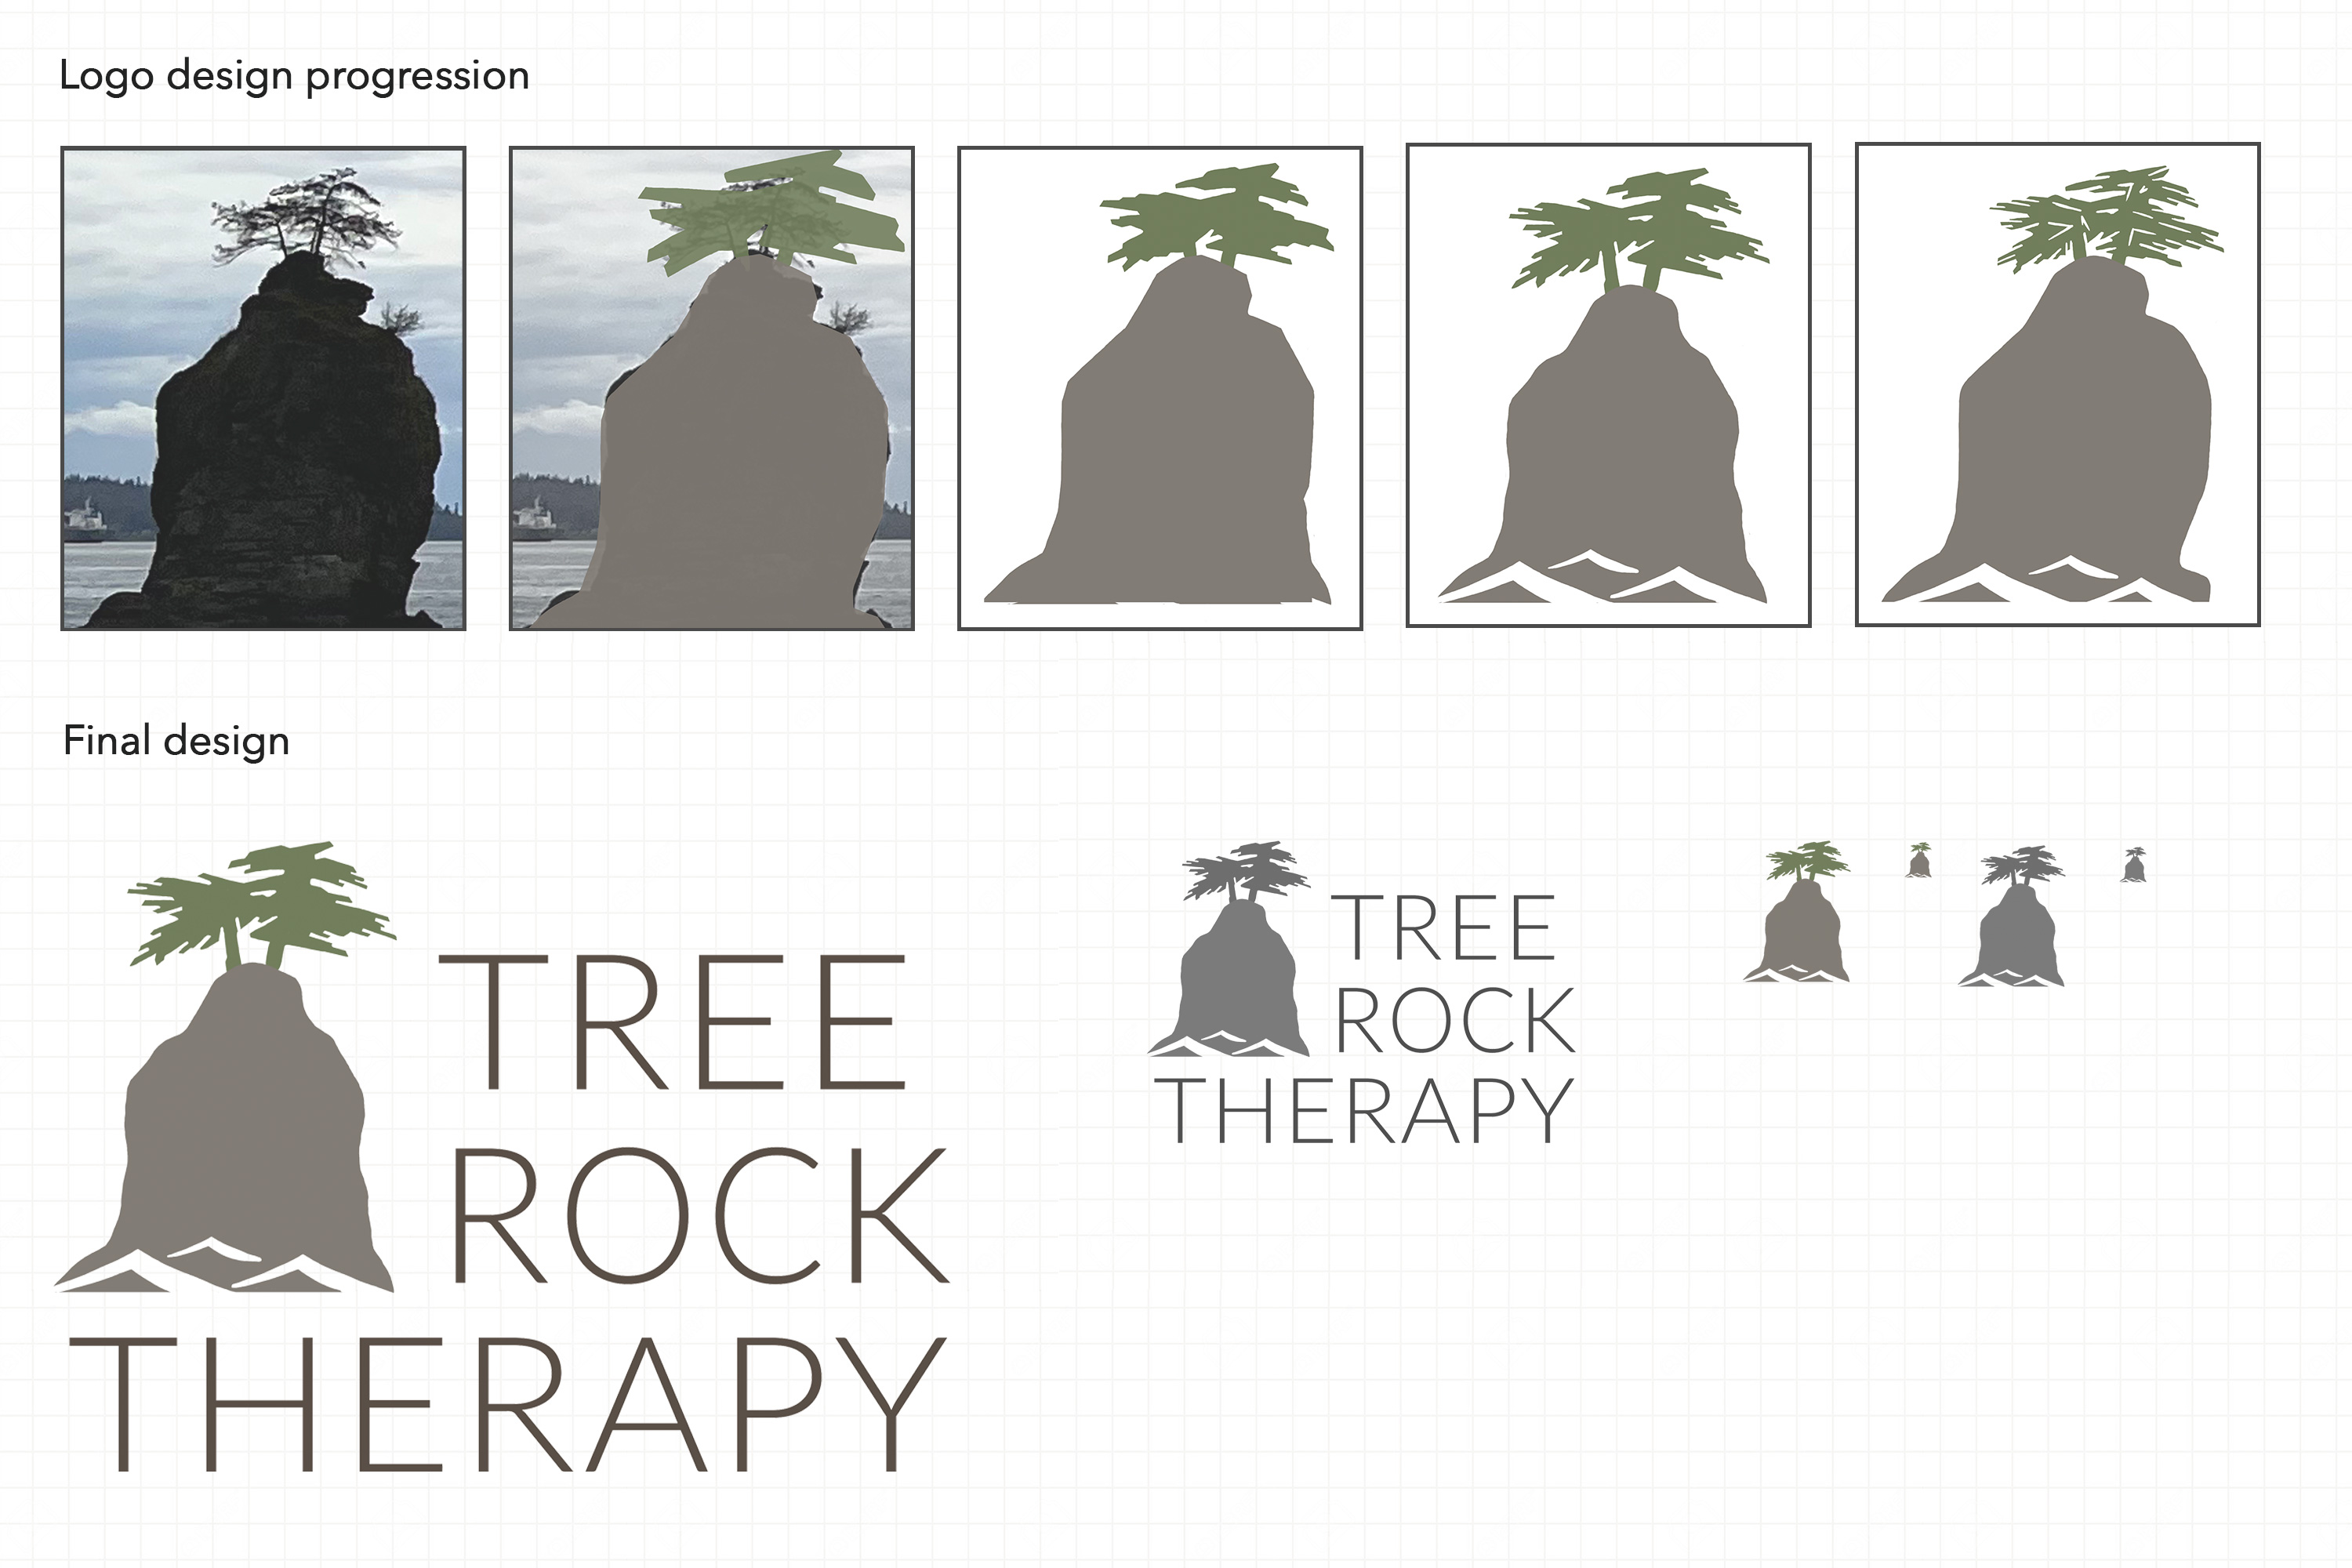 Treerock therapy logo design stages